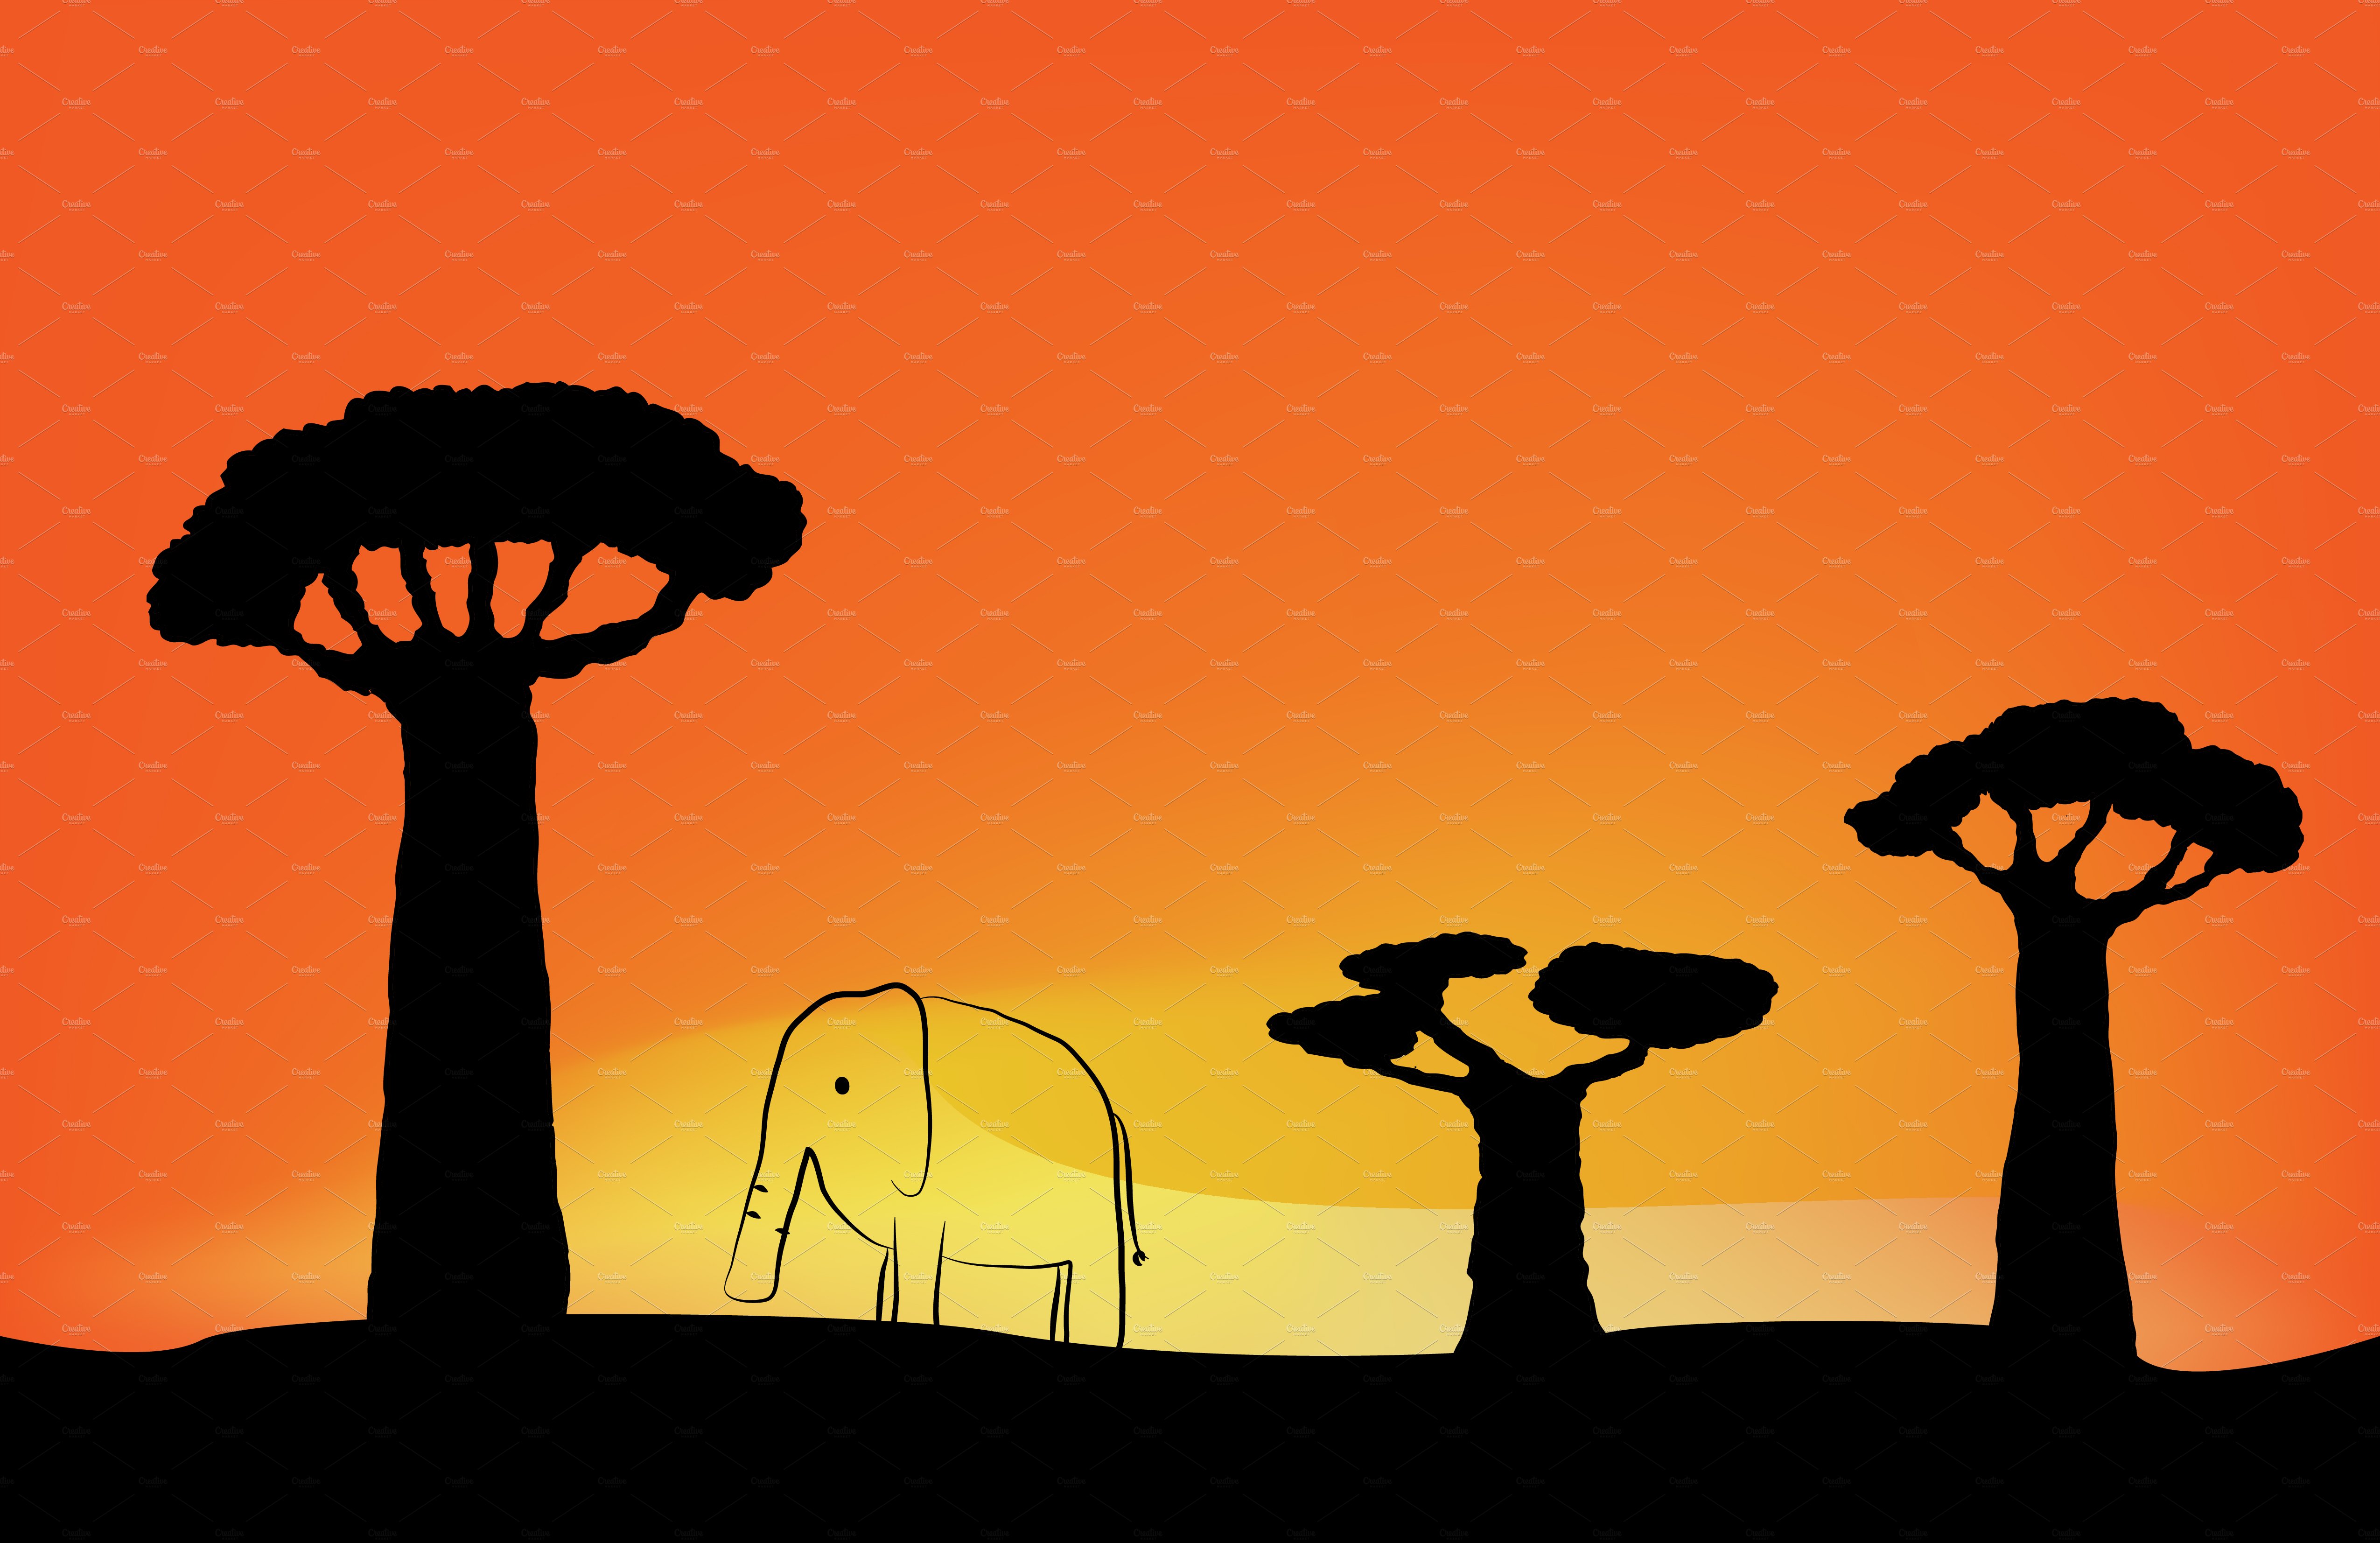 Elephant and baobabs sunset cover image.